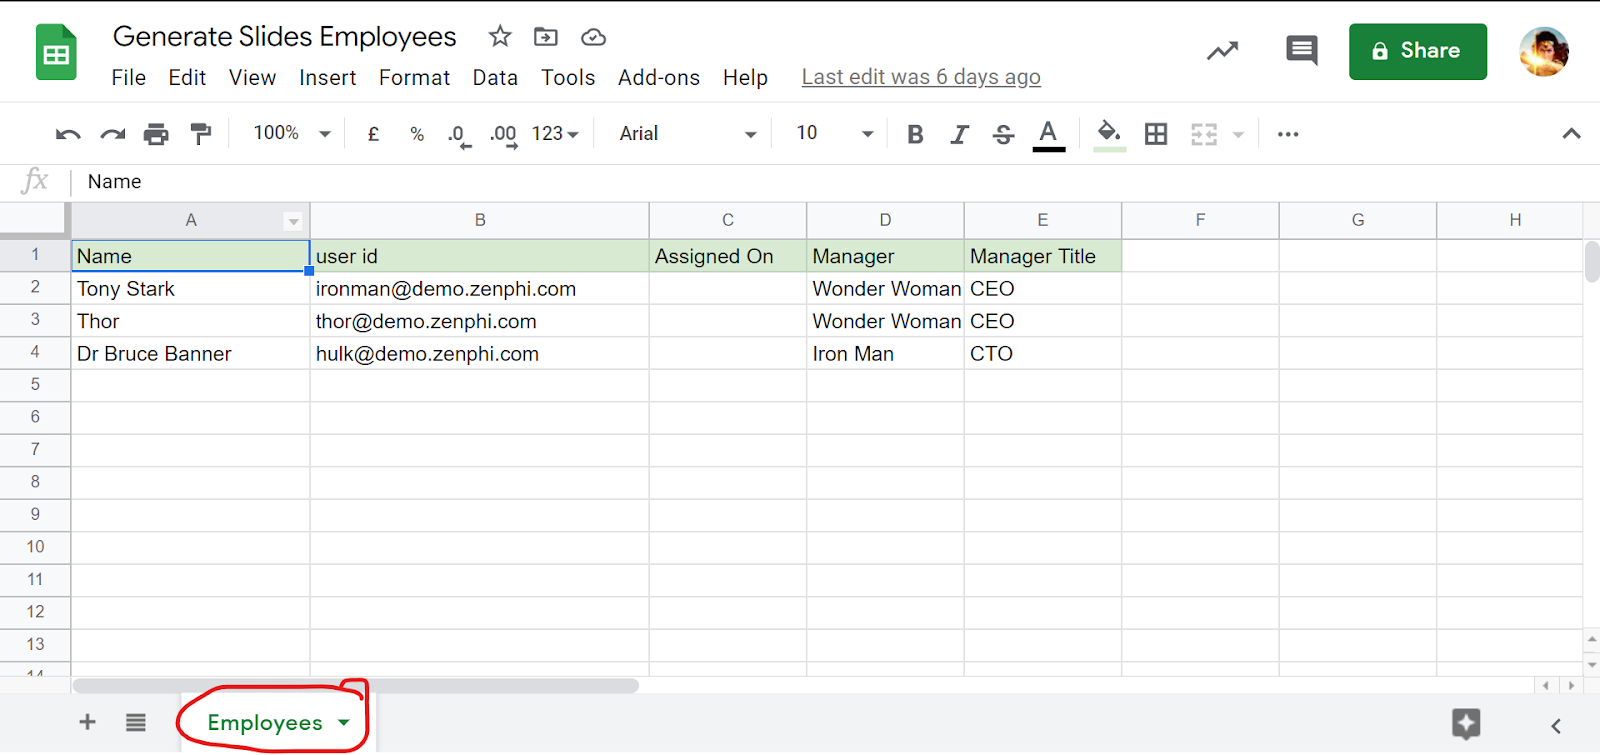 Record your interns' information using Google Sheets.